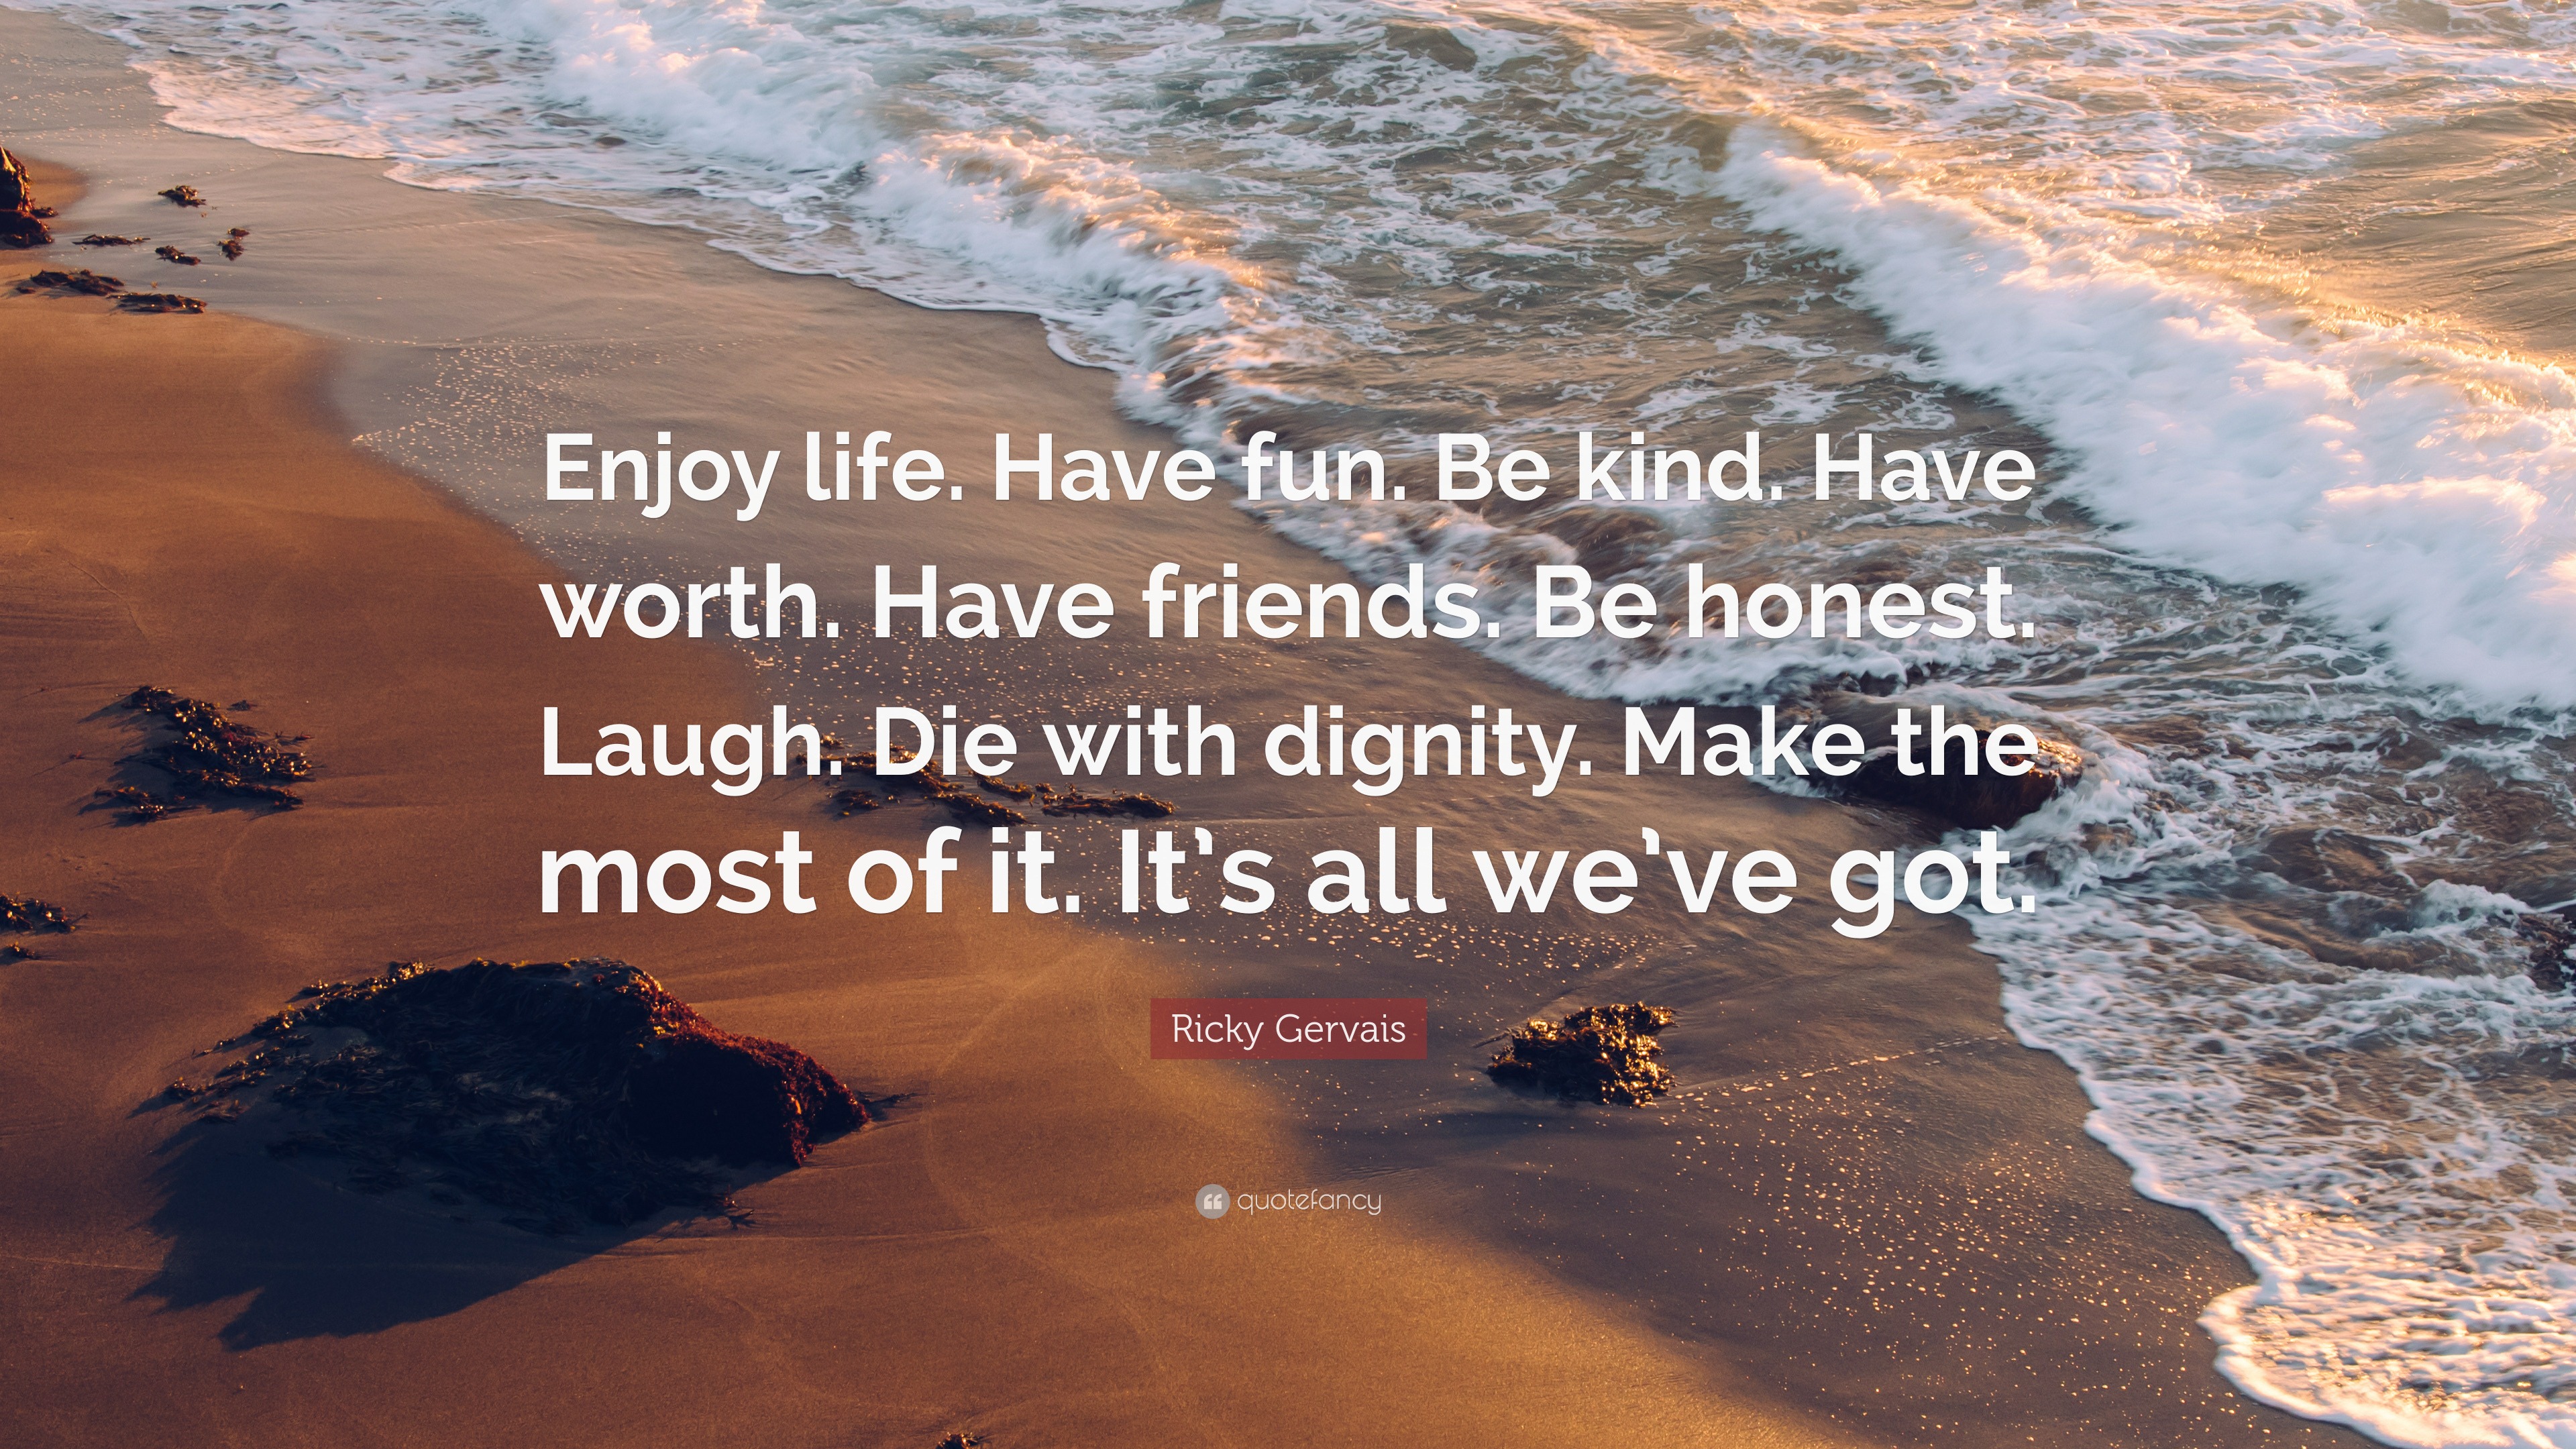 Ricky Gervais Quote “Enjoy life. Have fun. Be kind. Have